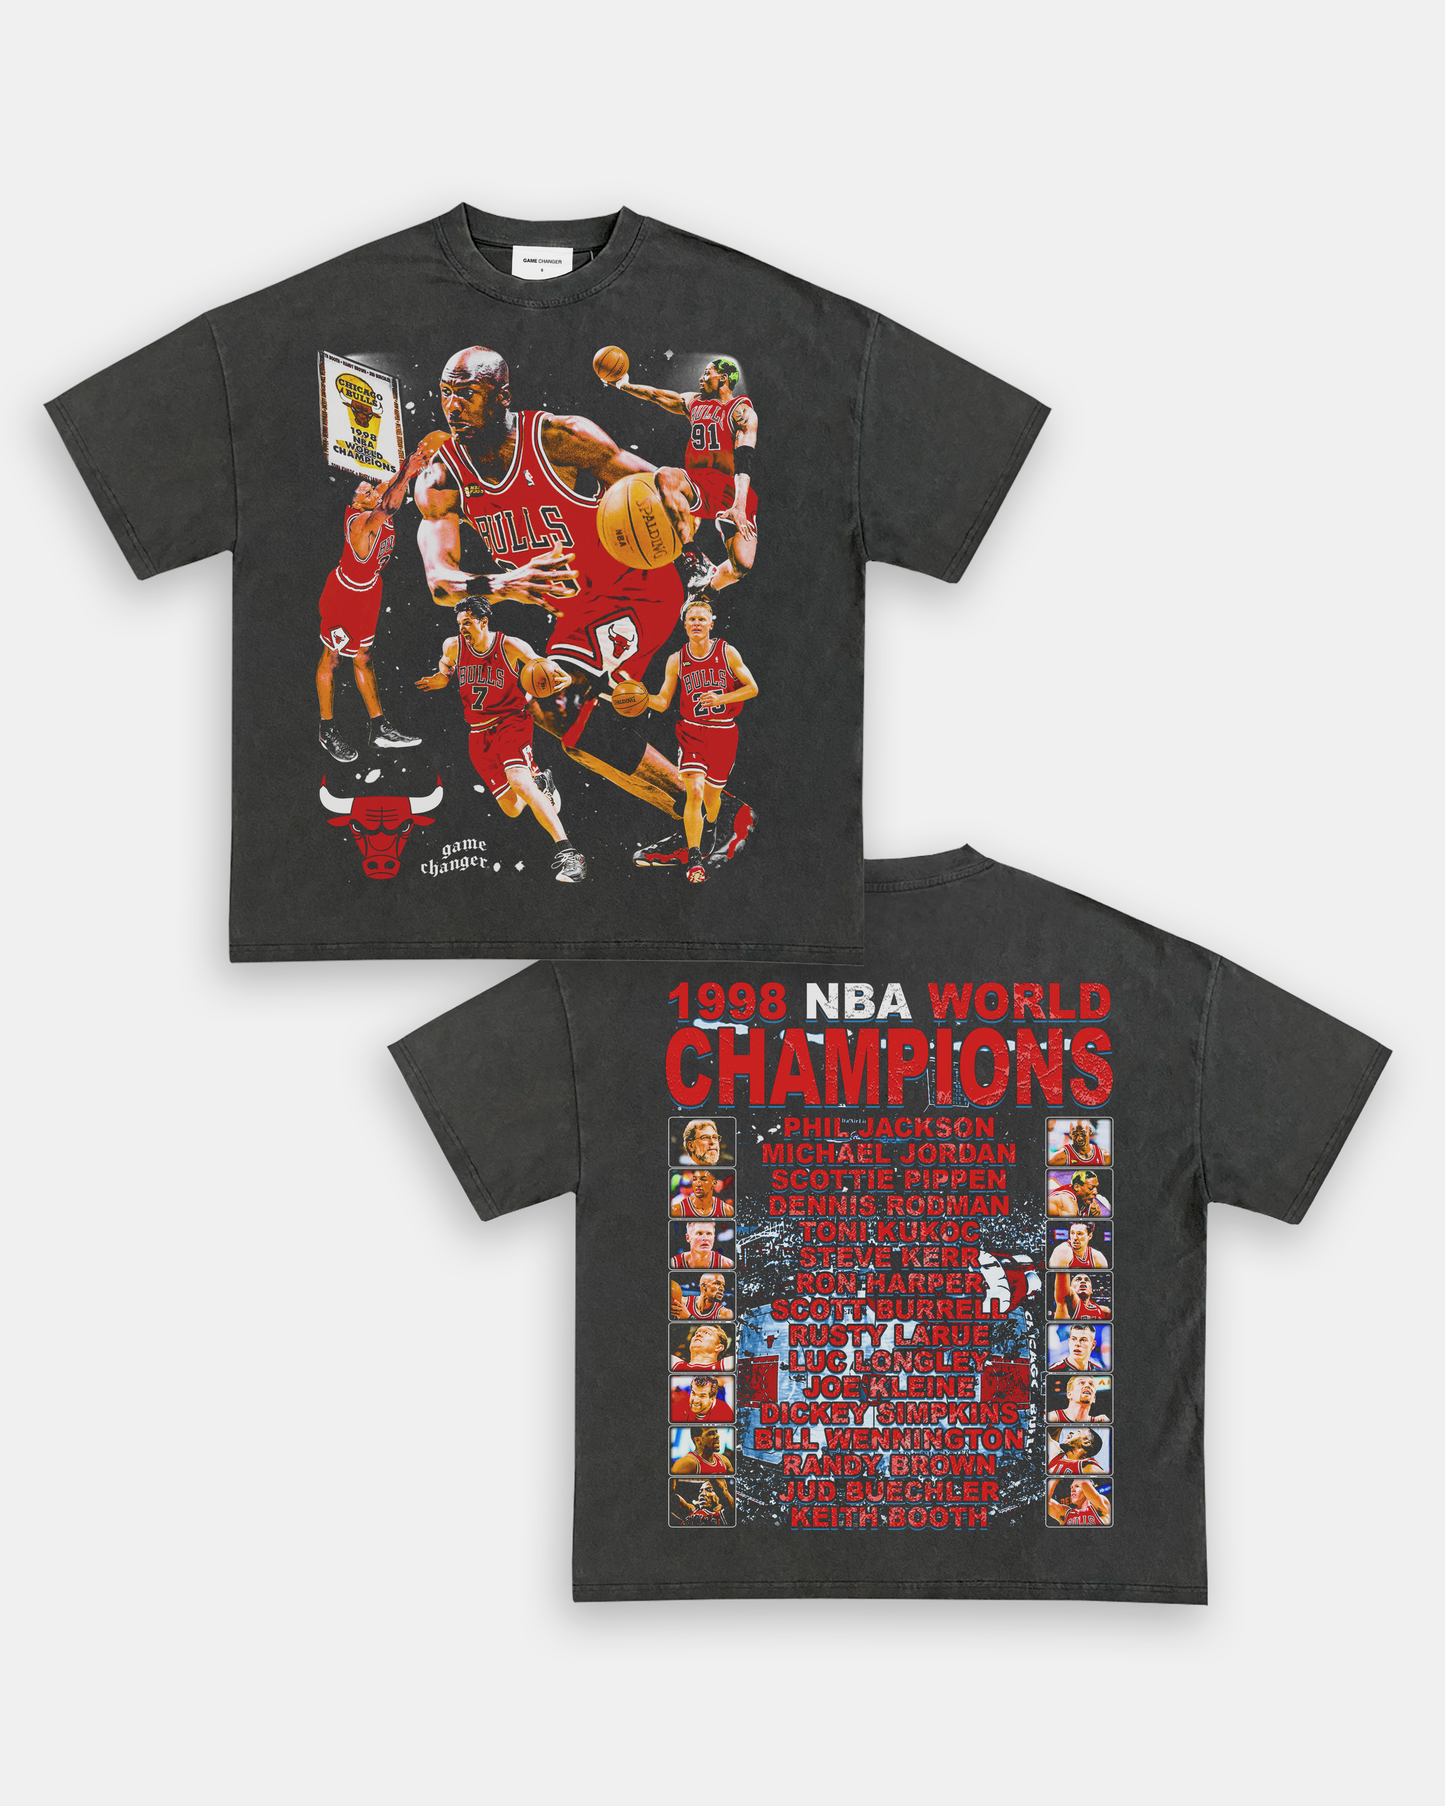 1998 NBA CHAMPS TEE - [DS]